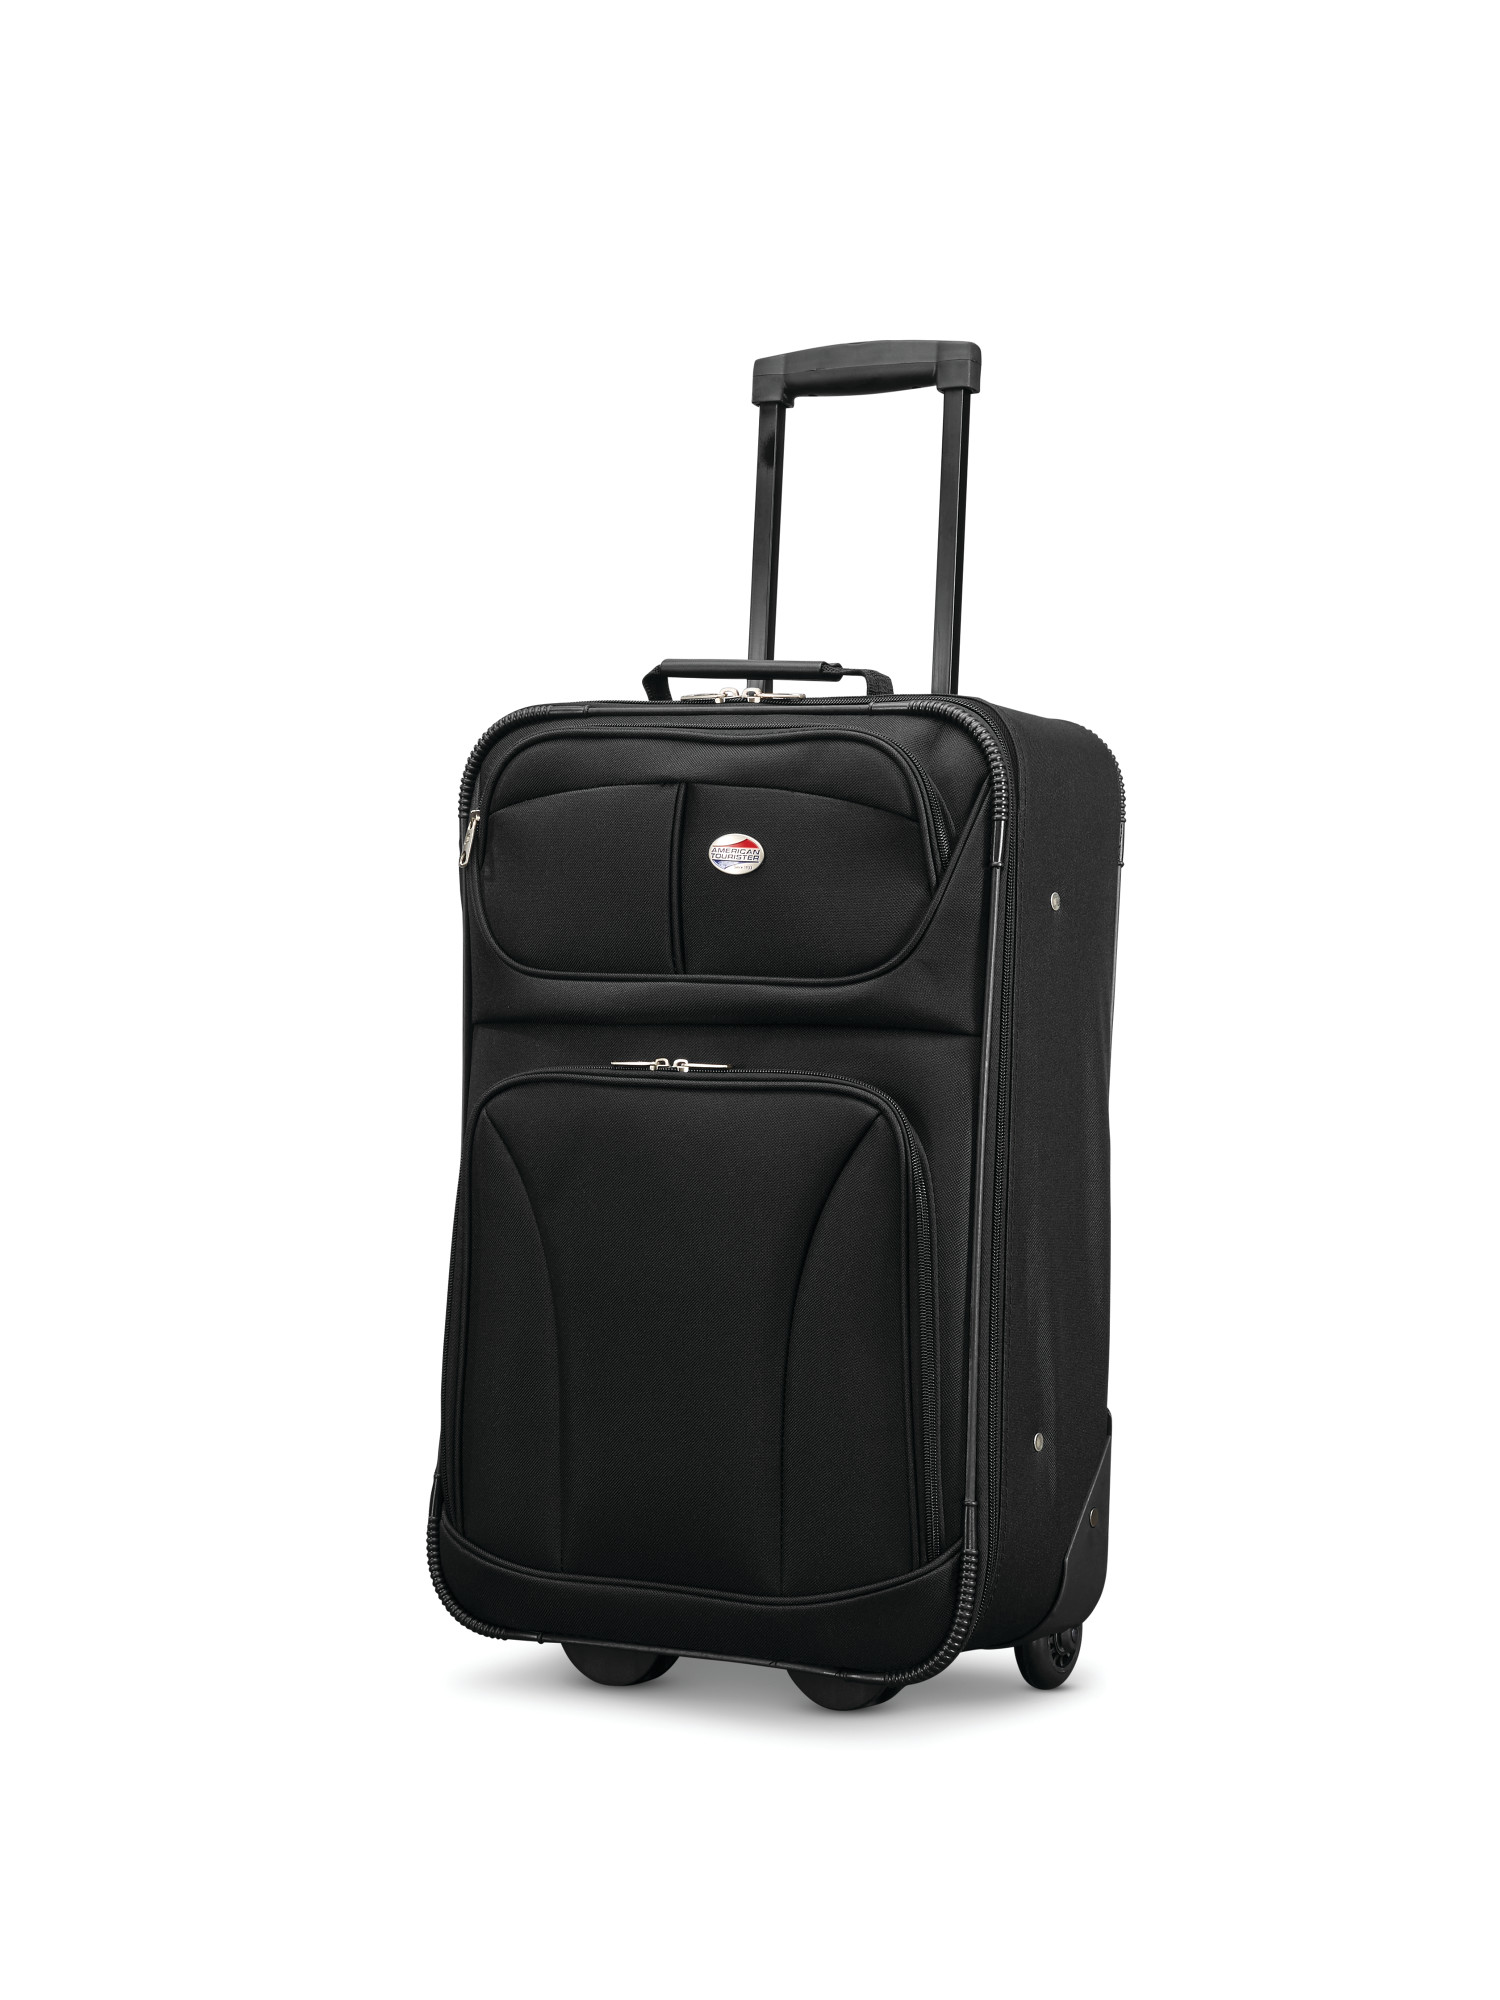 American Tourister Brewster 3 Piece Softside Luggage Set - image 7 of 9